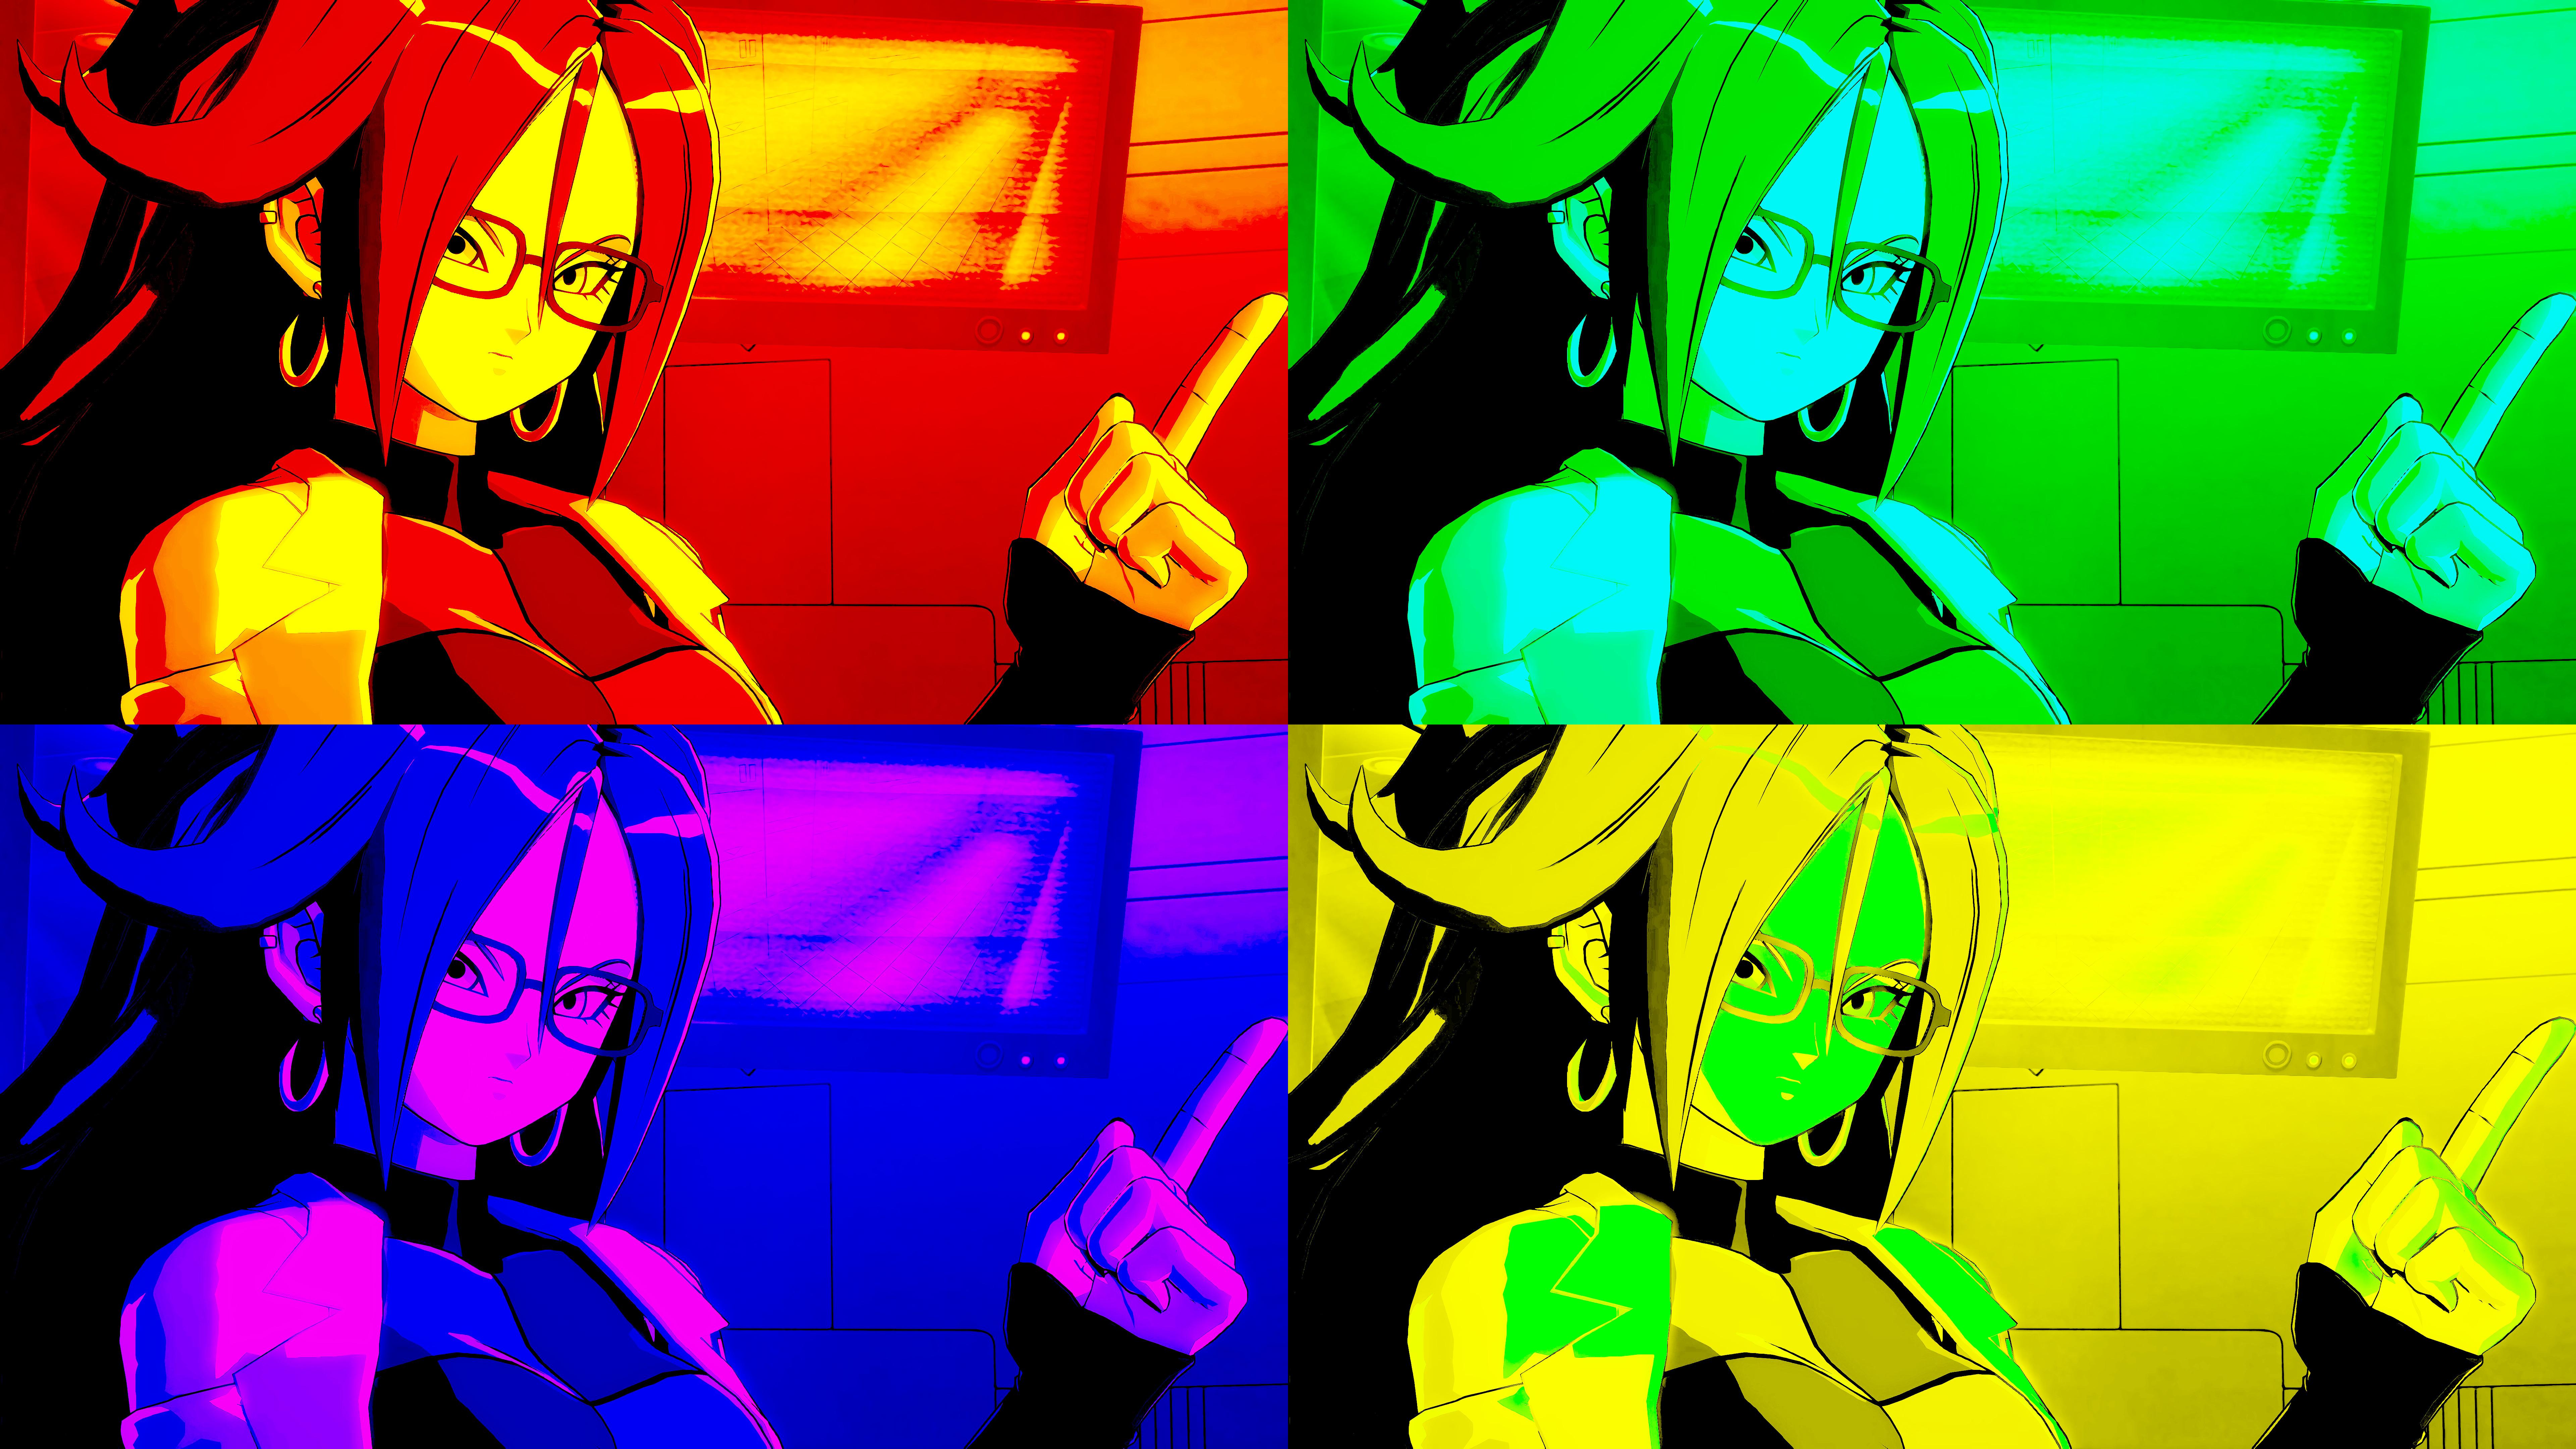 Android 21 Dragon Ball Fighterz B8135 Pop Art Collage